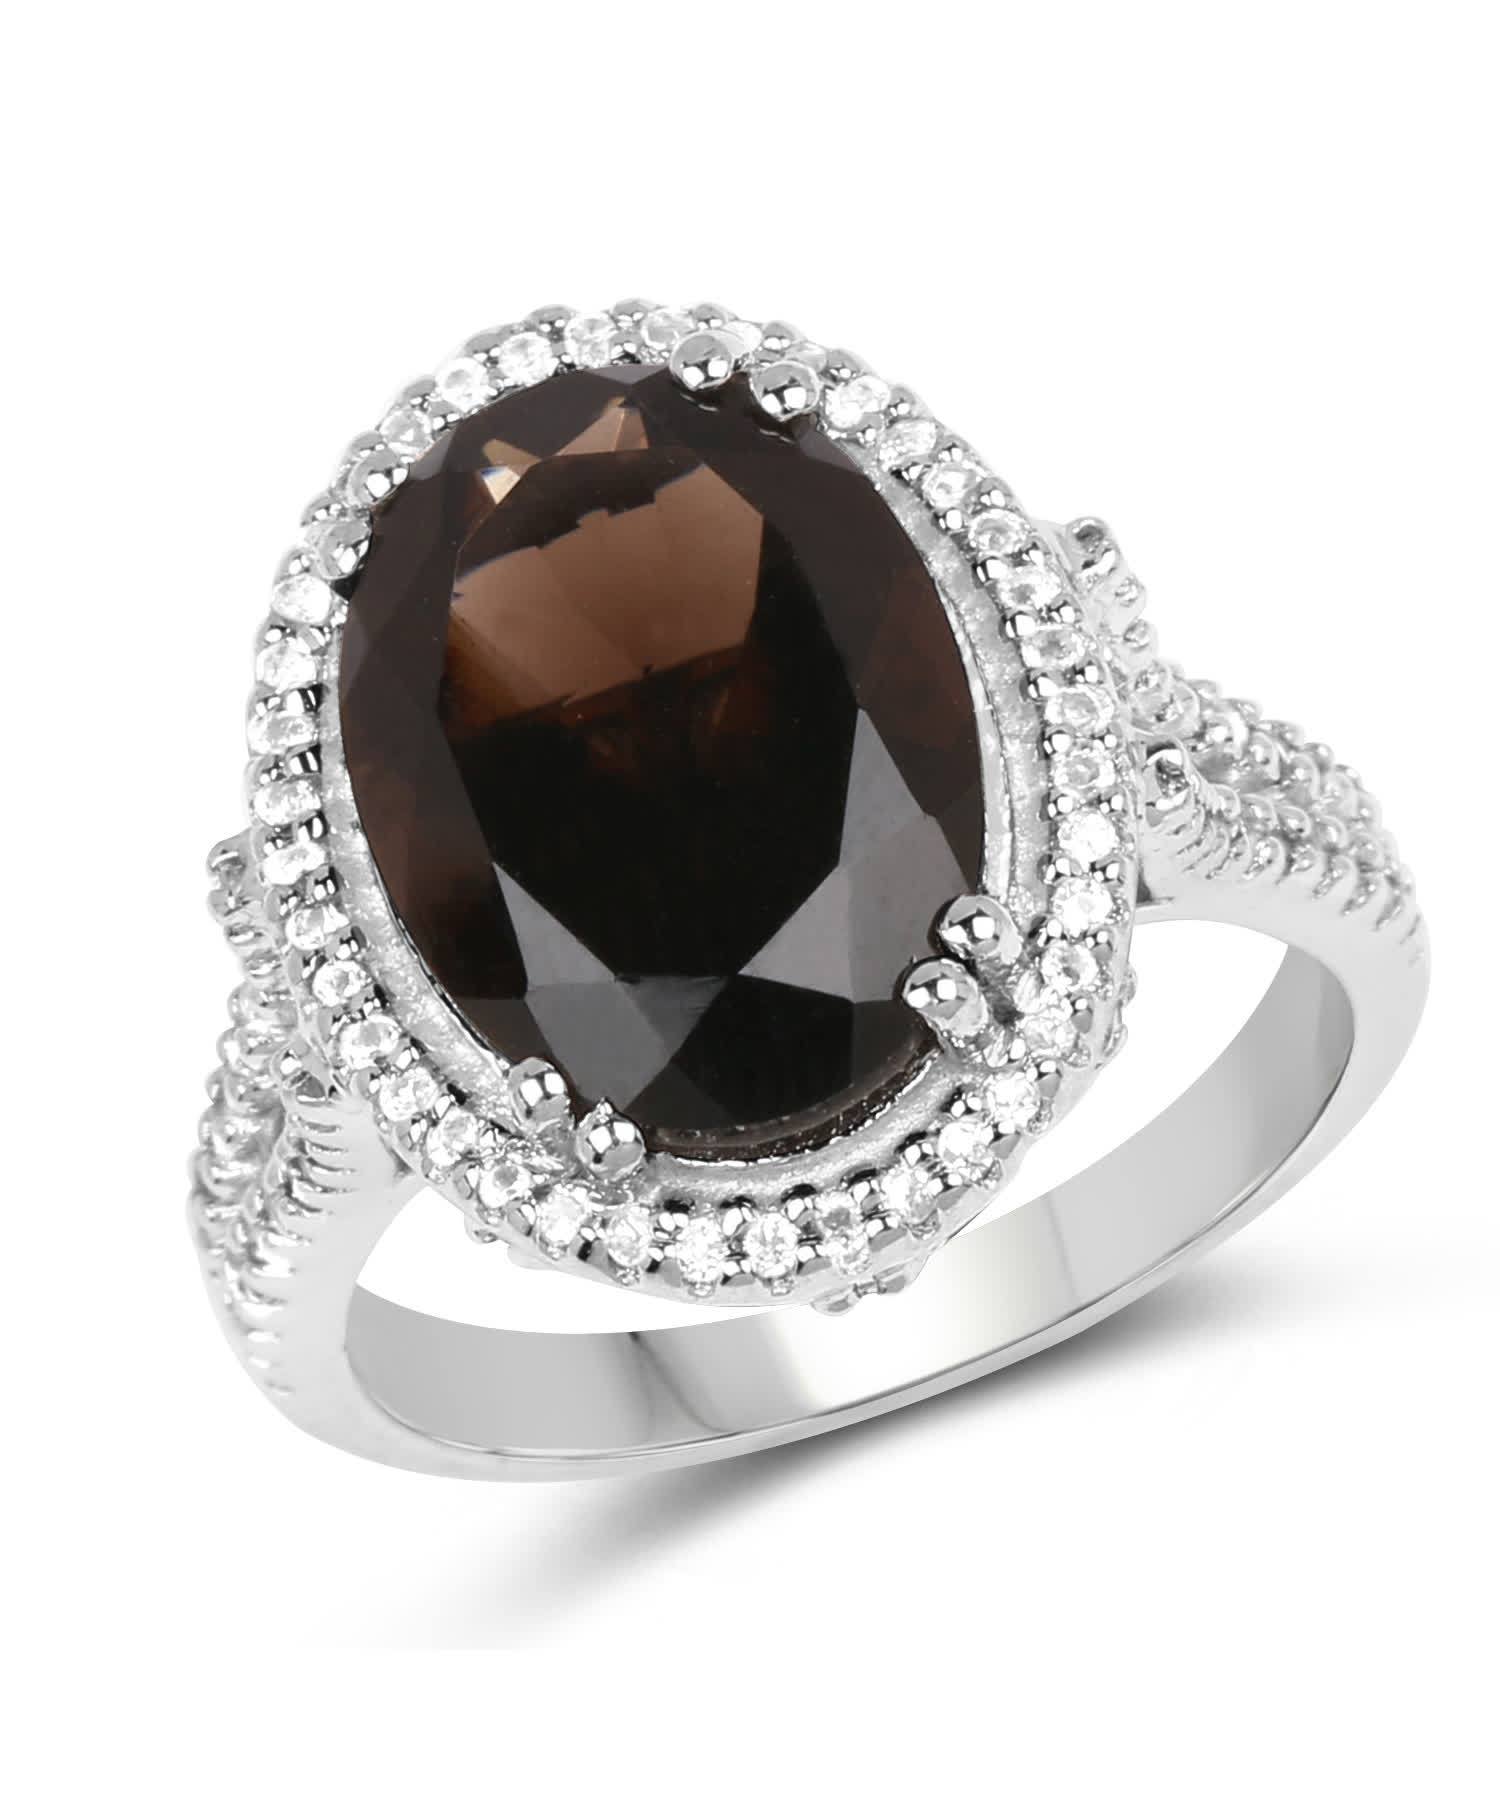 5.80ctw Natural Smoky Quartz and Topaz Rhodium Plated 925 Sterling Silver Halo Cocktail Ring View 1